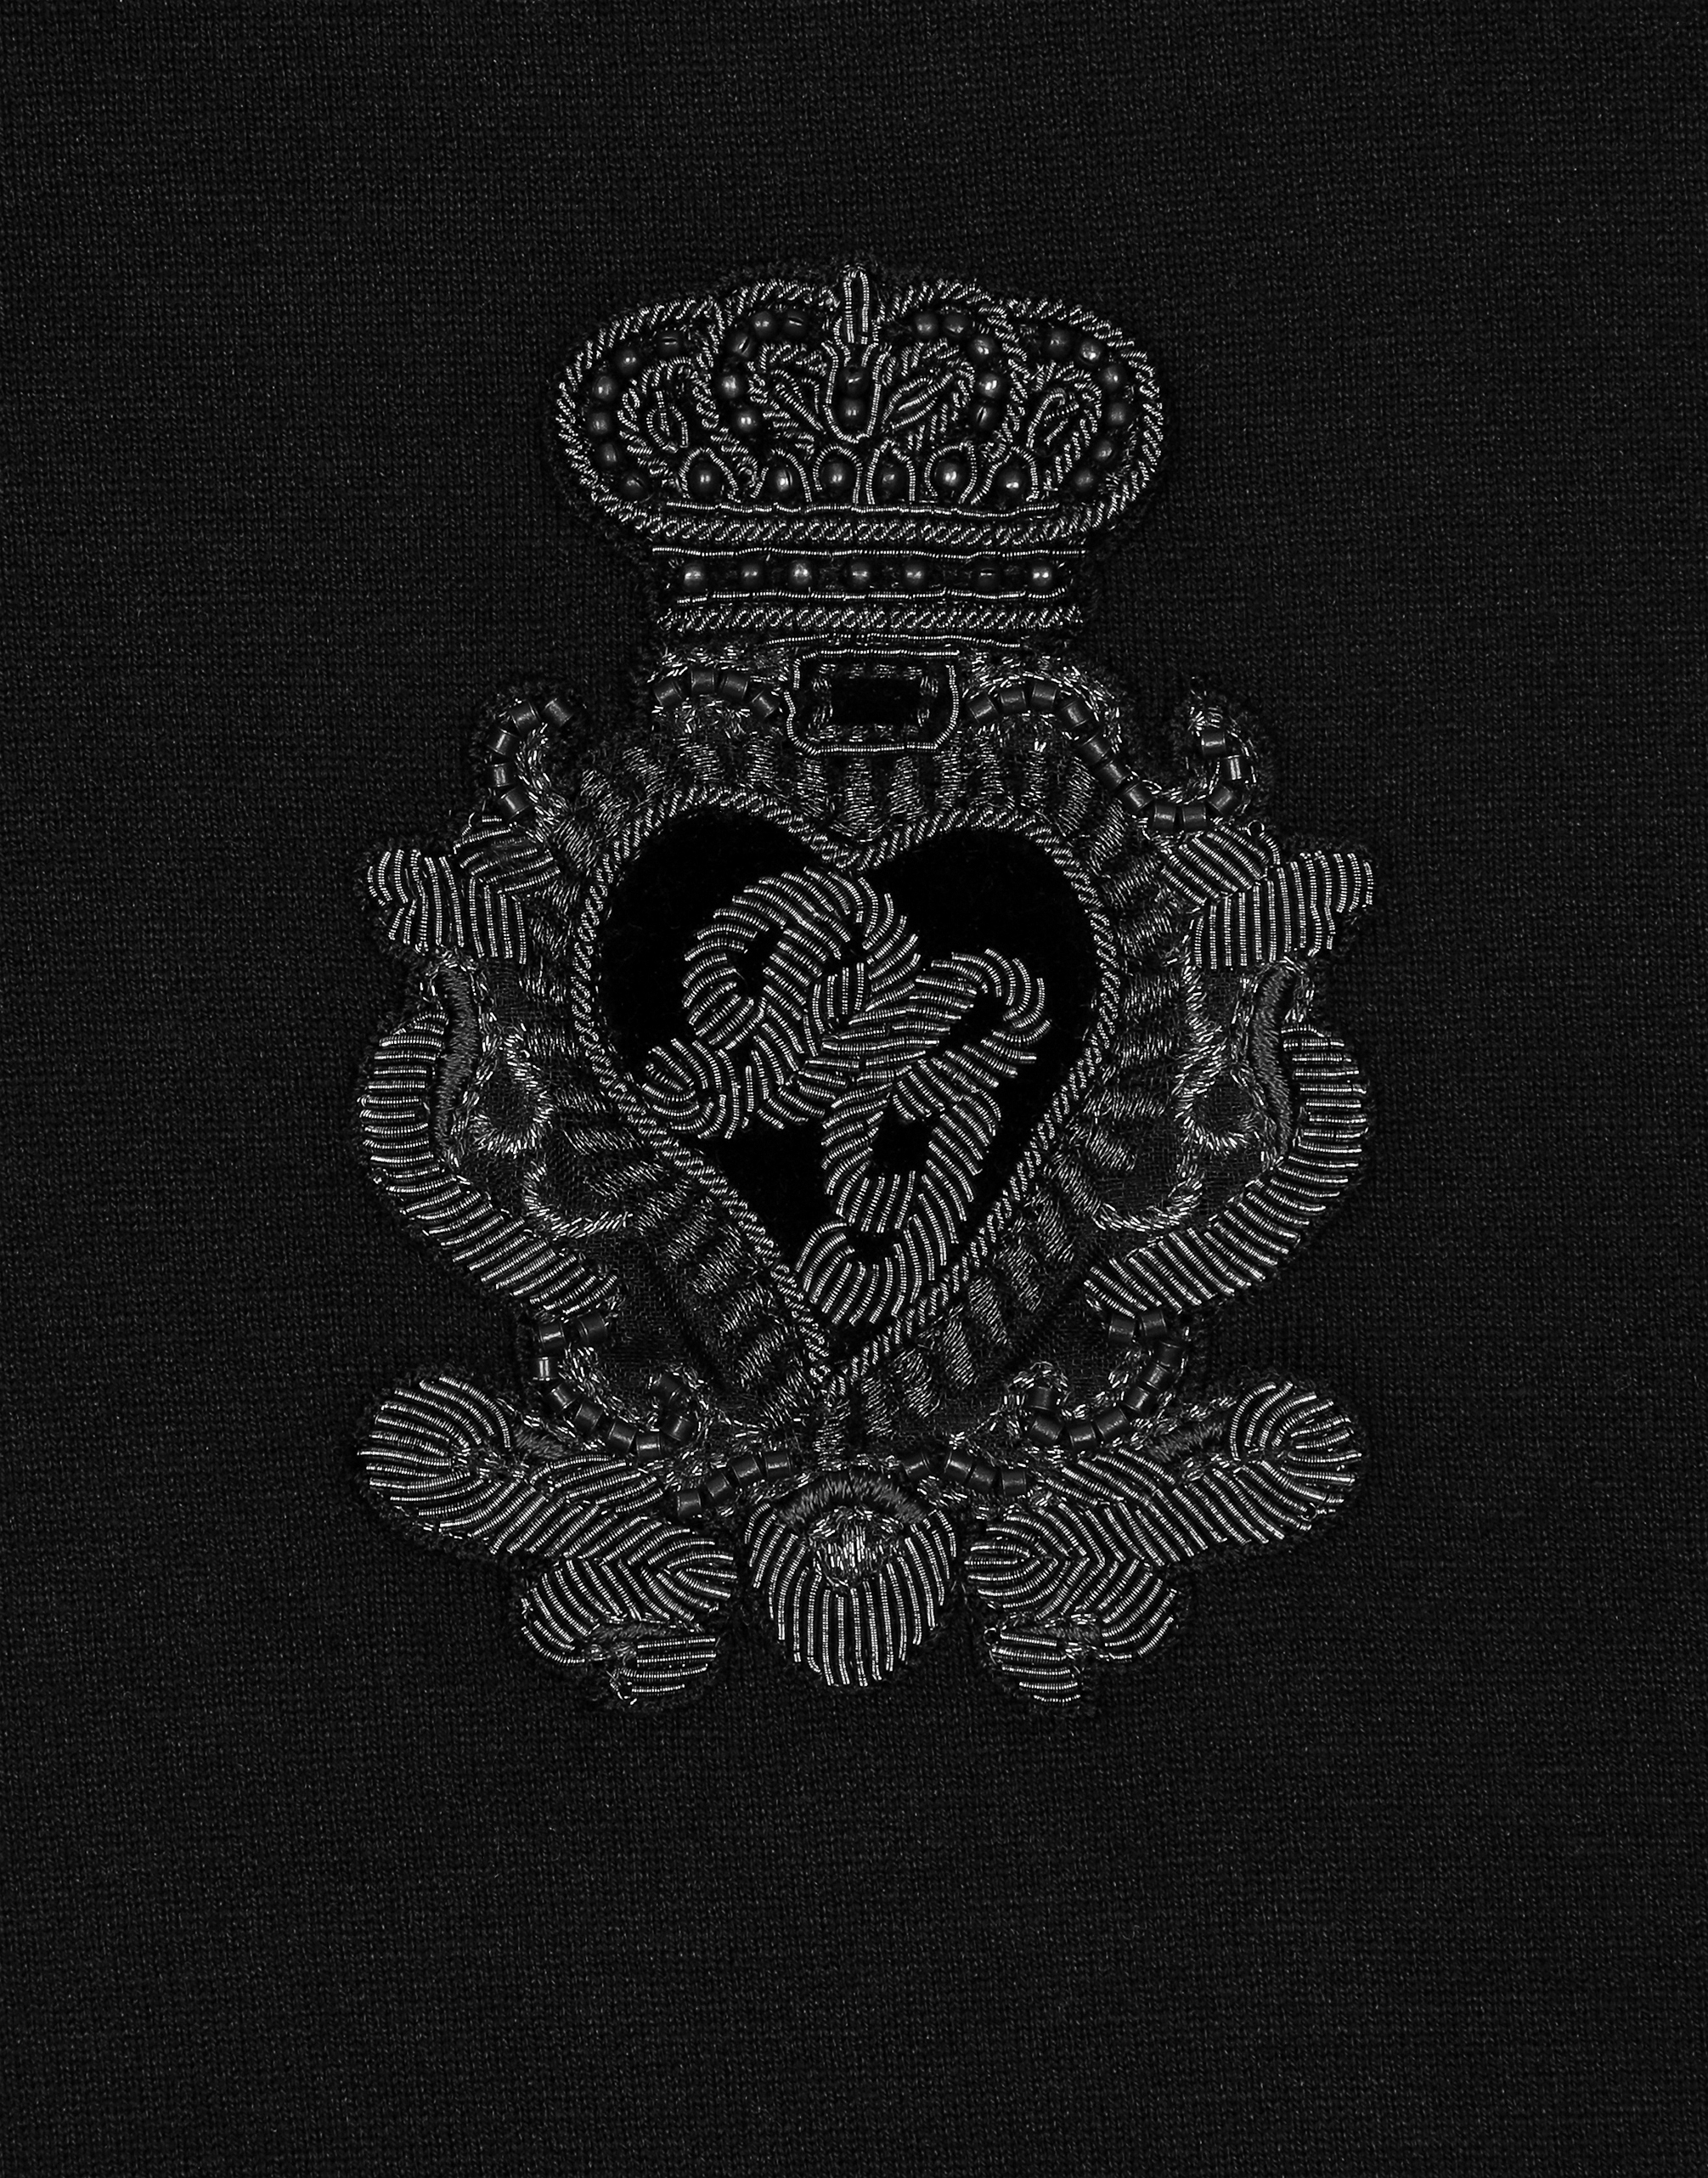 Cotton t-shirt with heraldic patch in Black